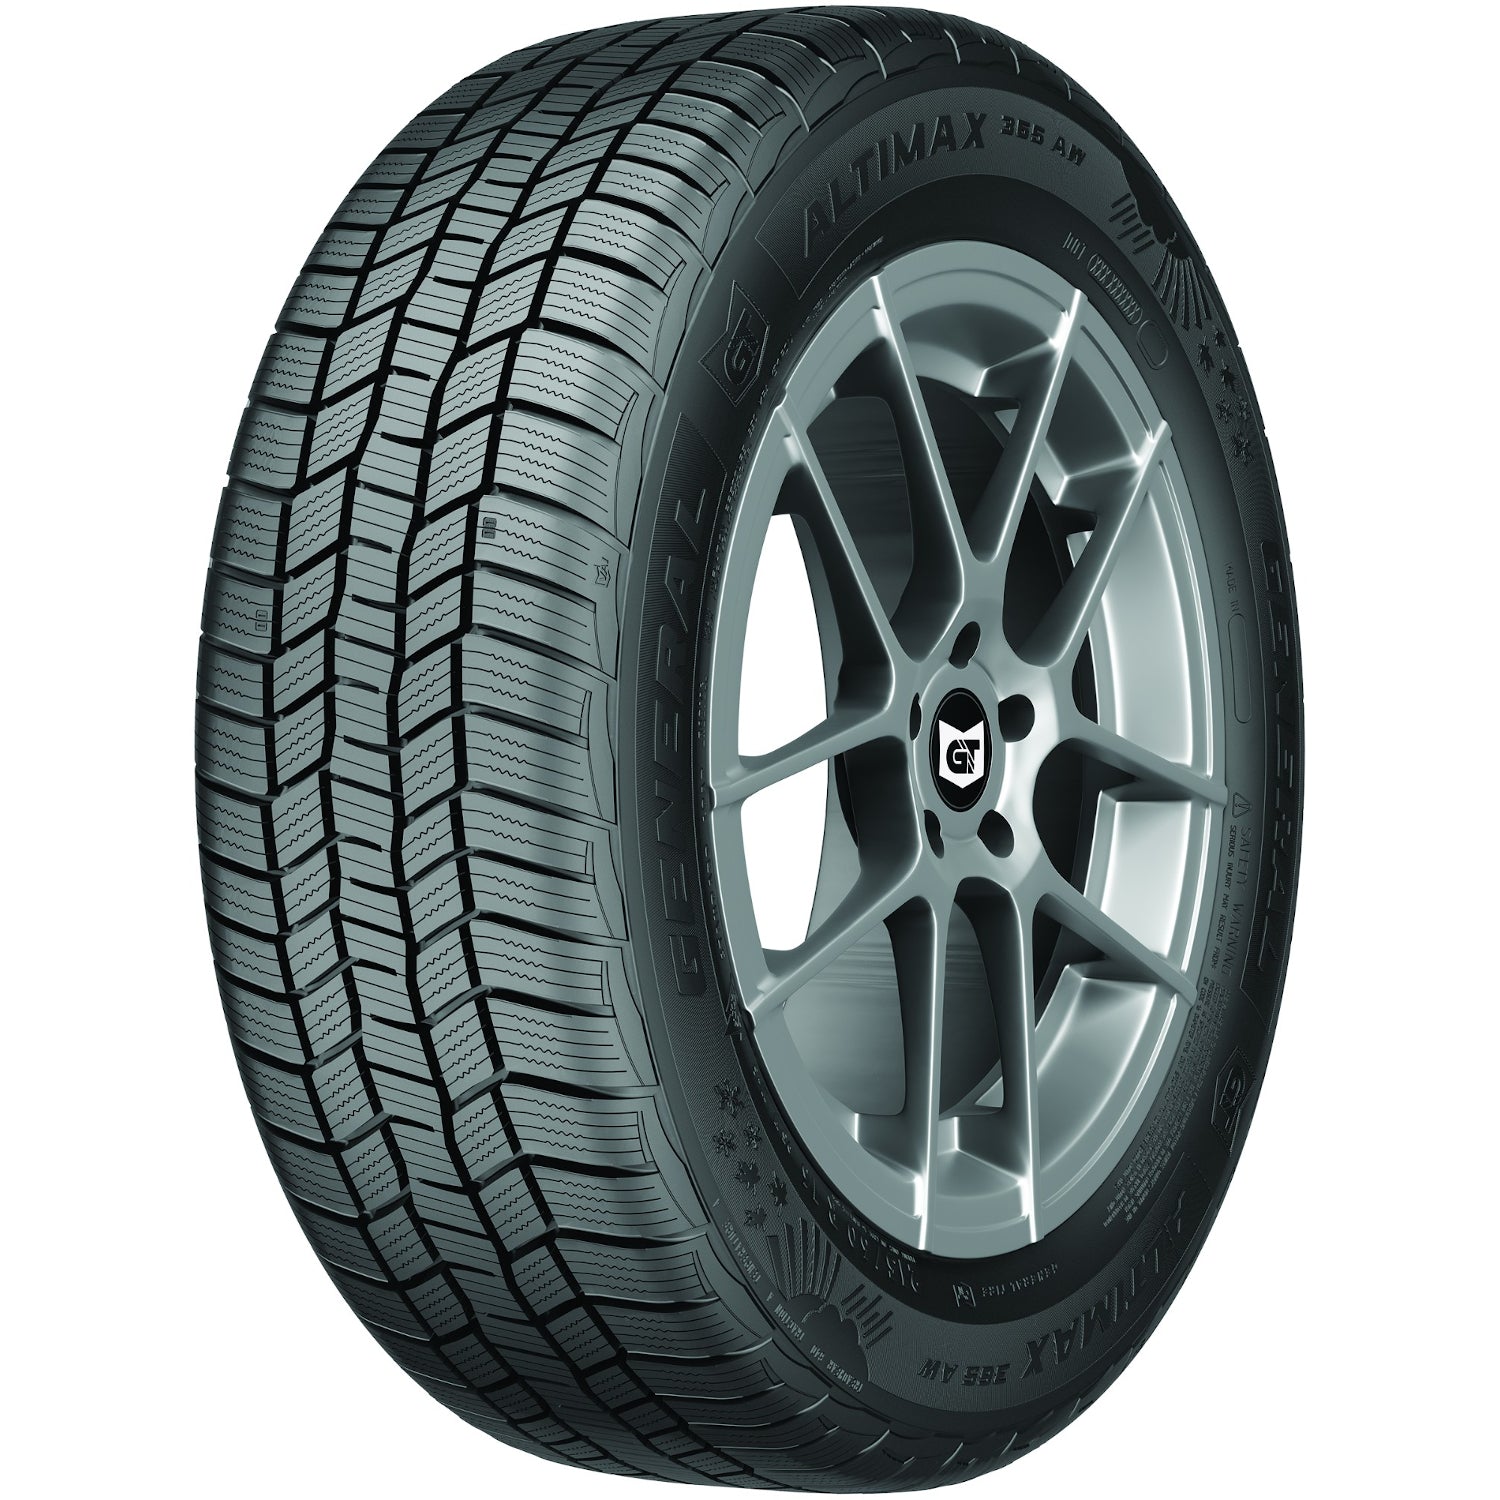 GENERAL ALTIMAX 365AW 235/55R17 (27.2X9.3R 17) Tires